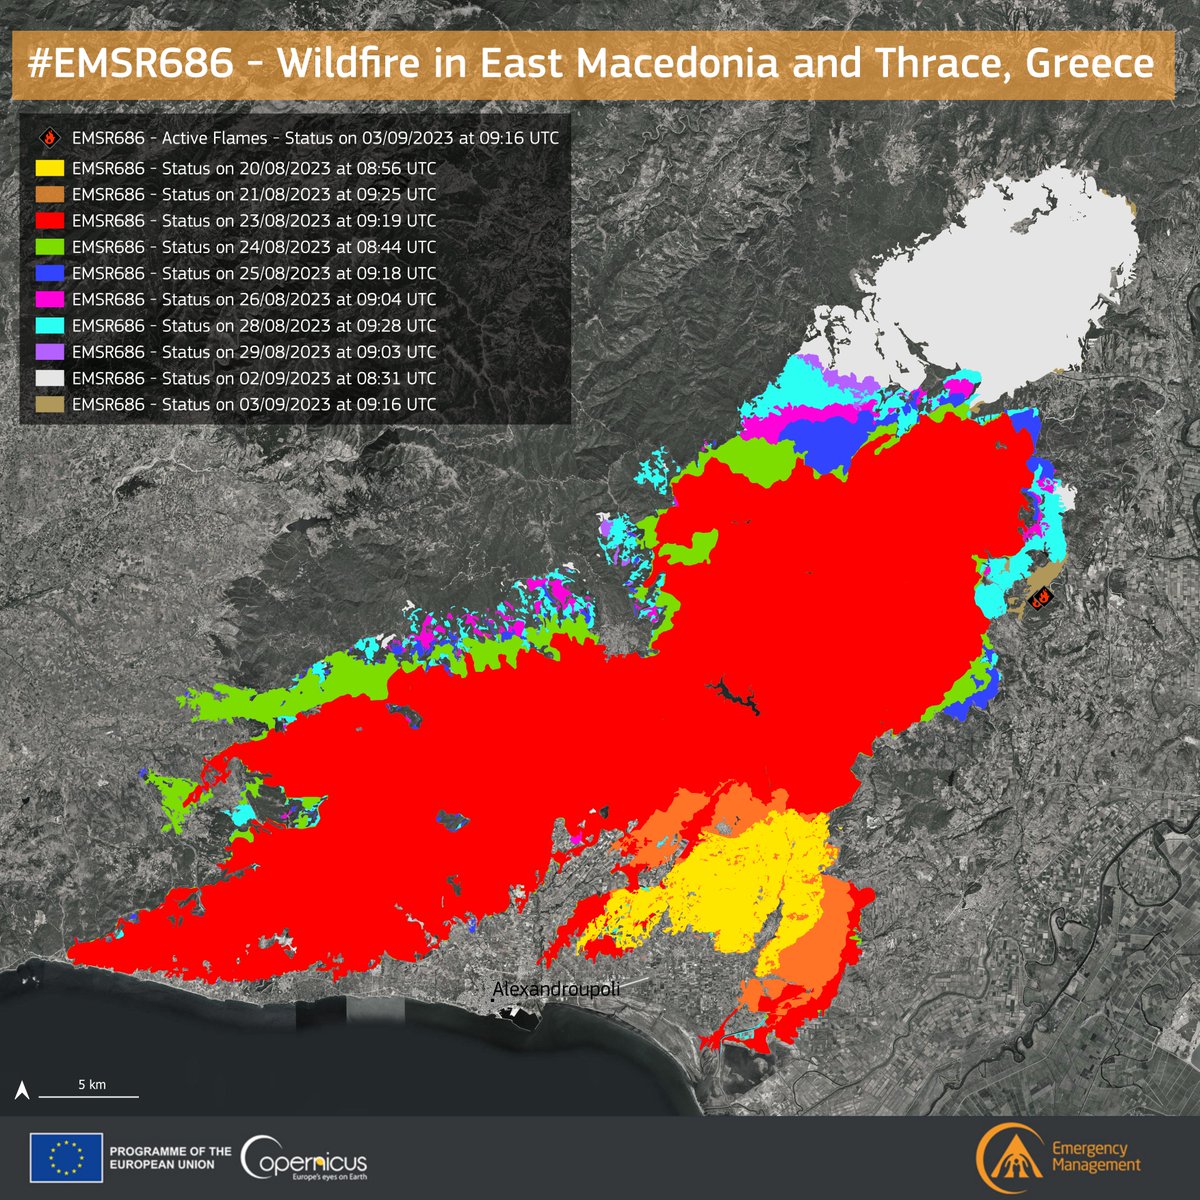 🔴#EMSR686

Our #RapidMappingTeam delivered its 9⃣th Monitoring Product for the historic #wildfire in the #Evros area, in #Greece🇬🇷

🔥A total burnt area of 9⃣3⃣,8⃣8⃣0⃣ ha has been detected (+12,619 ha in 5 days)

Read more in the Situational Reporting👇
rapidmapping.emergency.copernicus.eu/EMSR686/report…